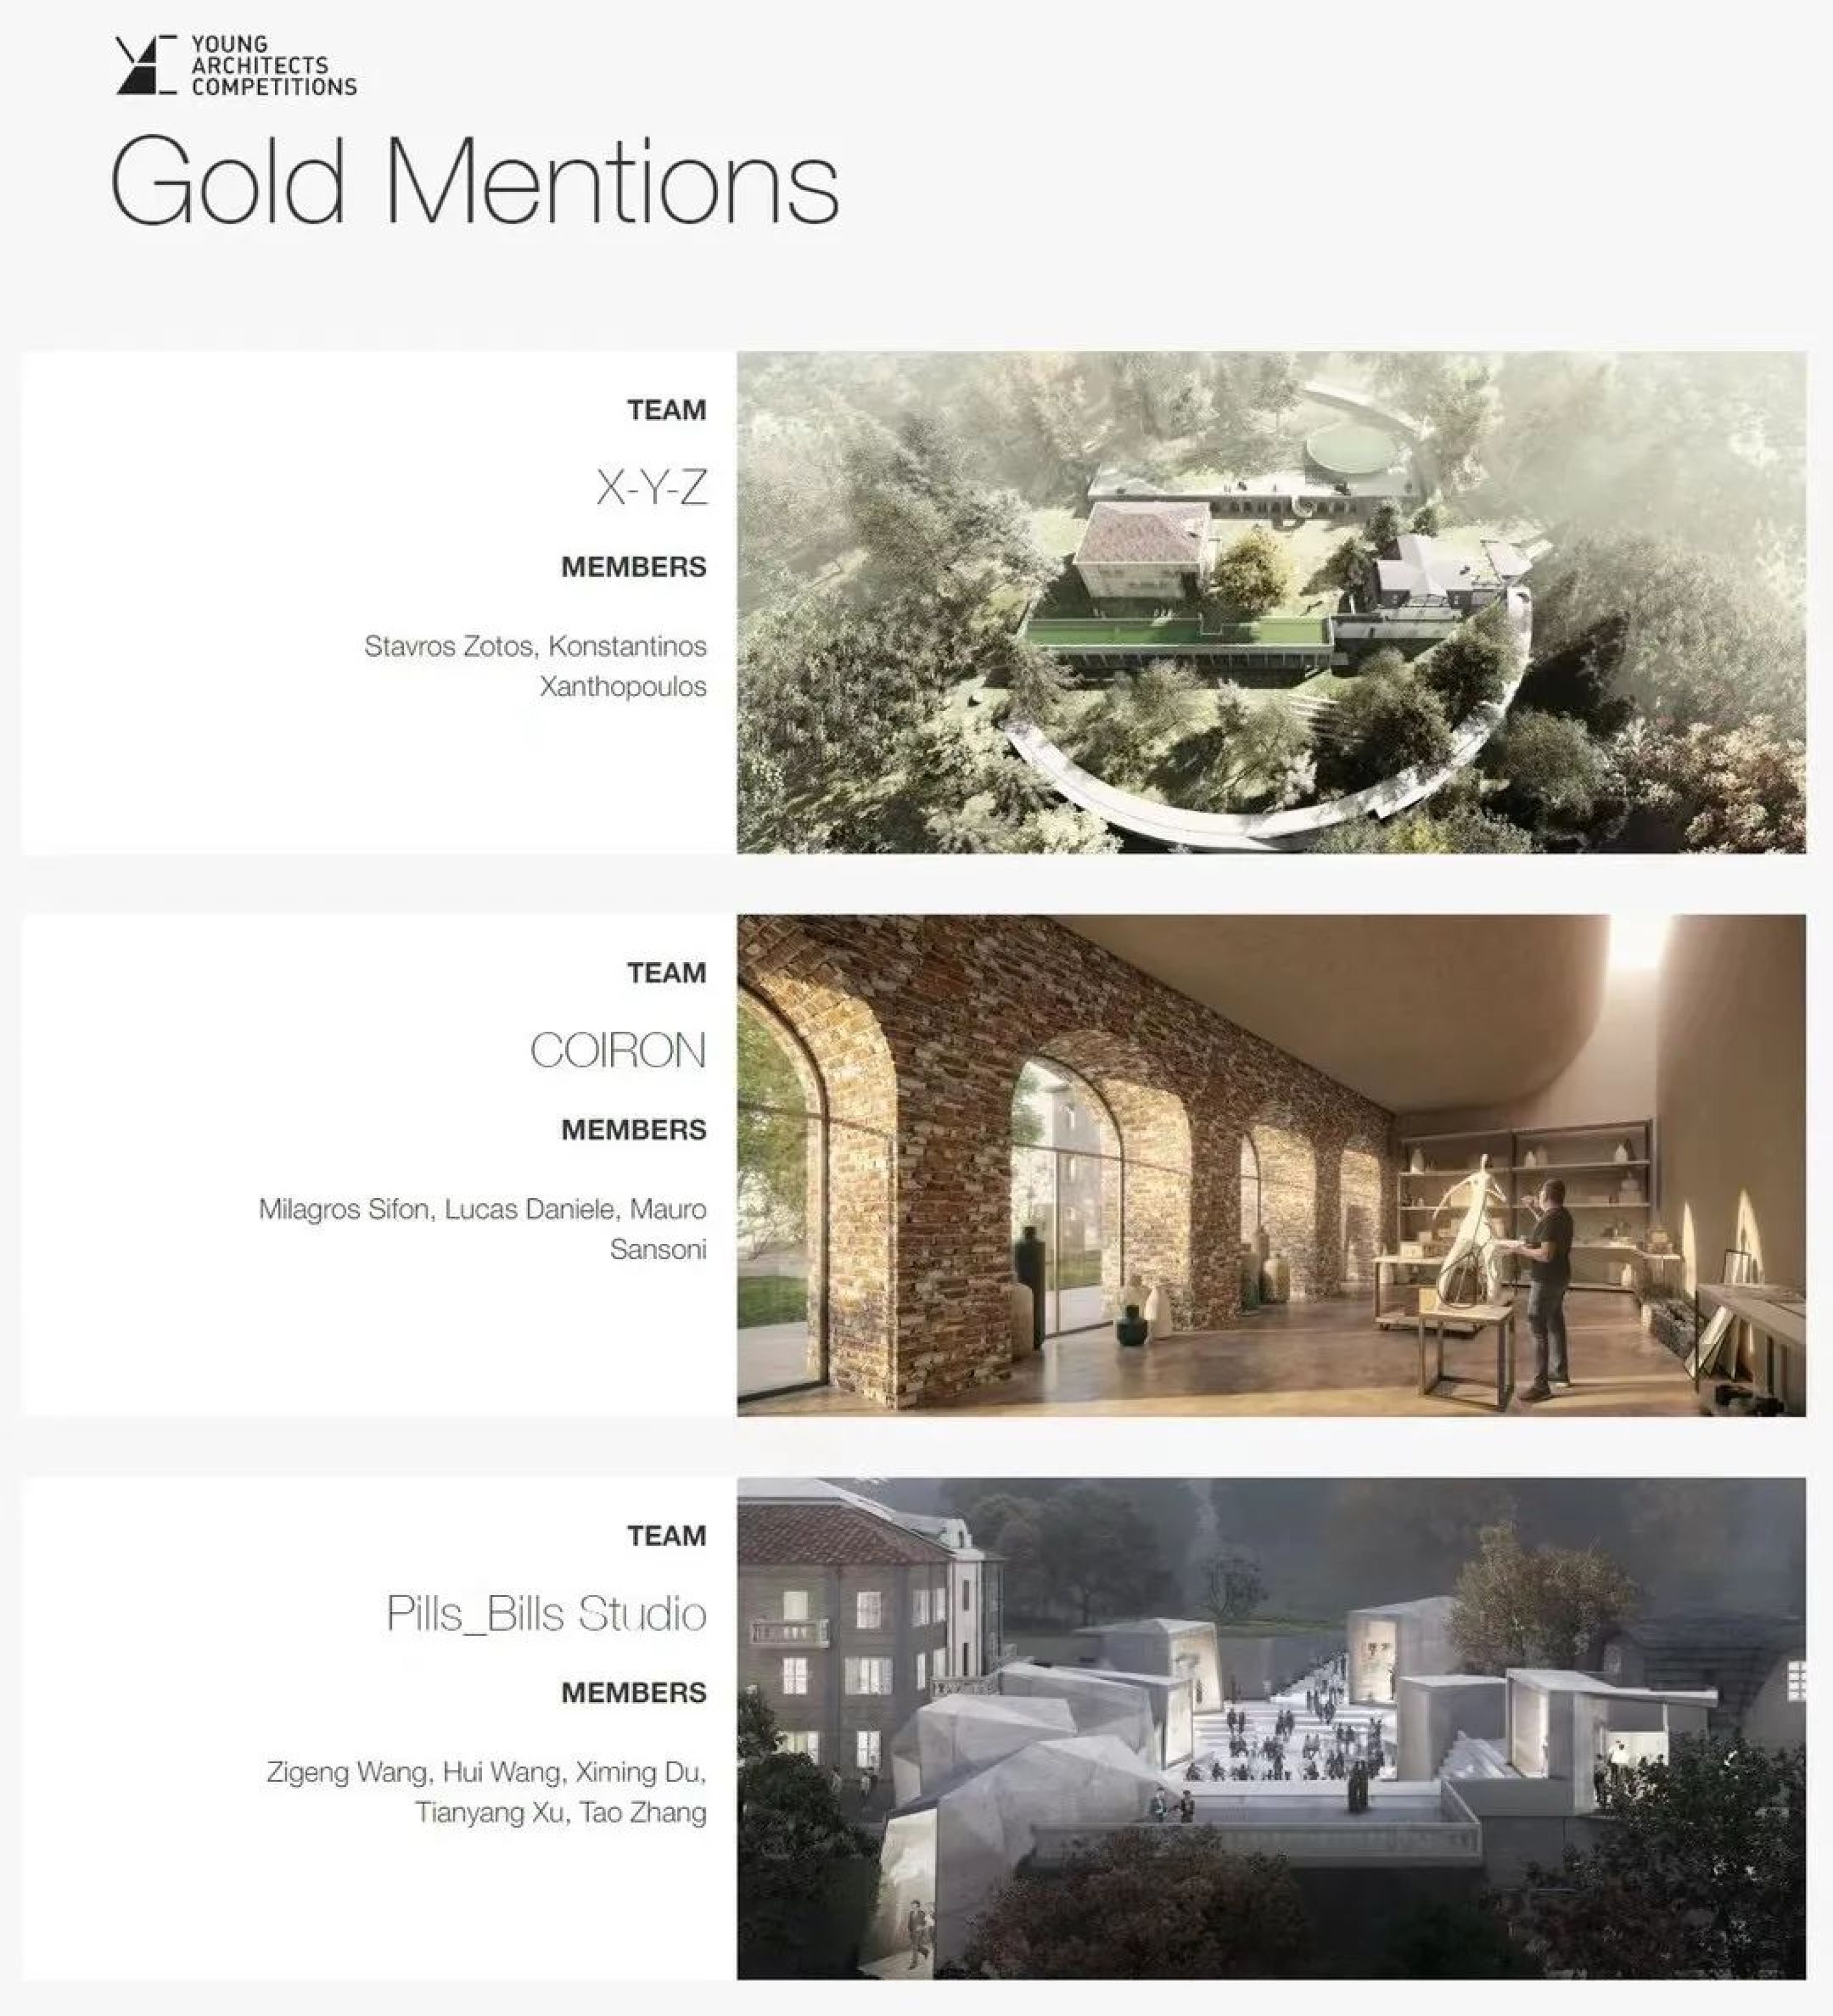 PILLS Won the YAC International Architectural Design Competition “Hills of the Arts” Gold Mentions